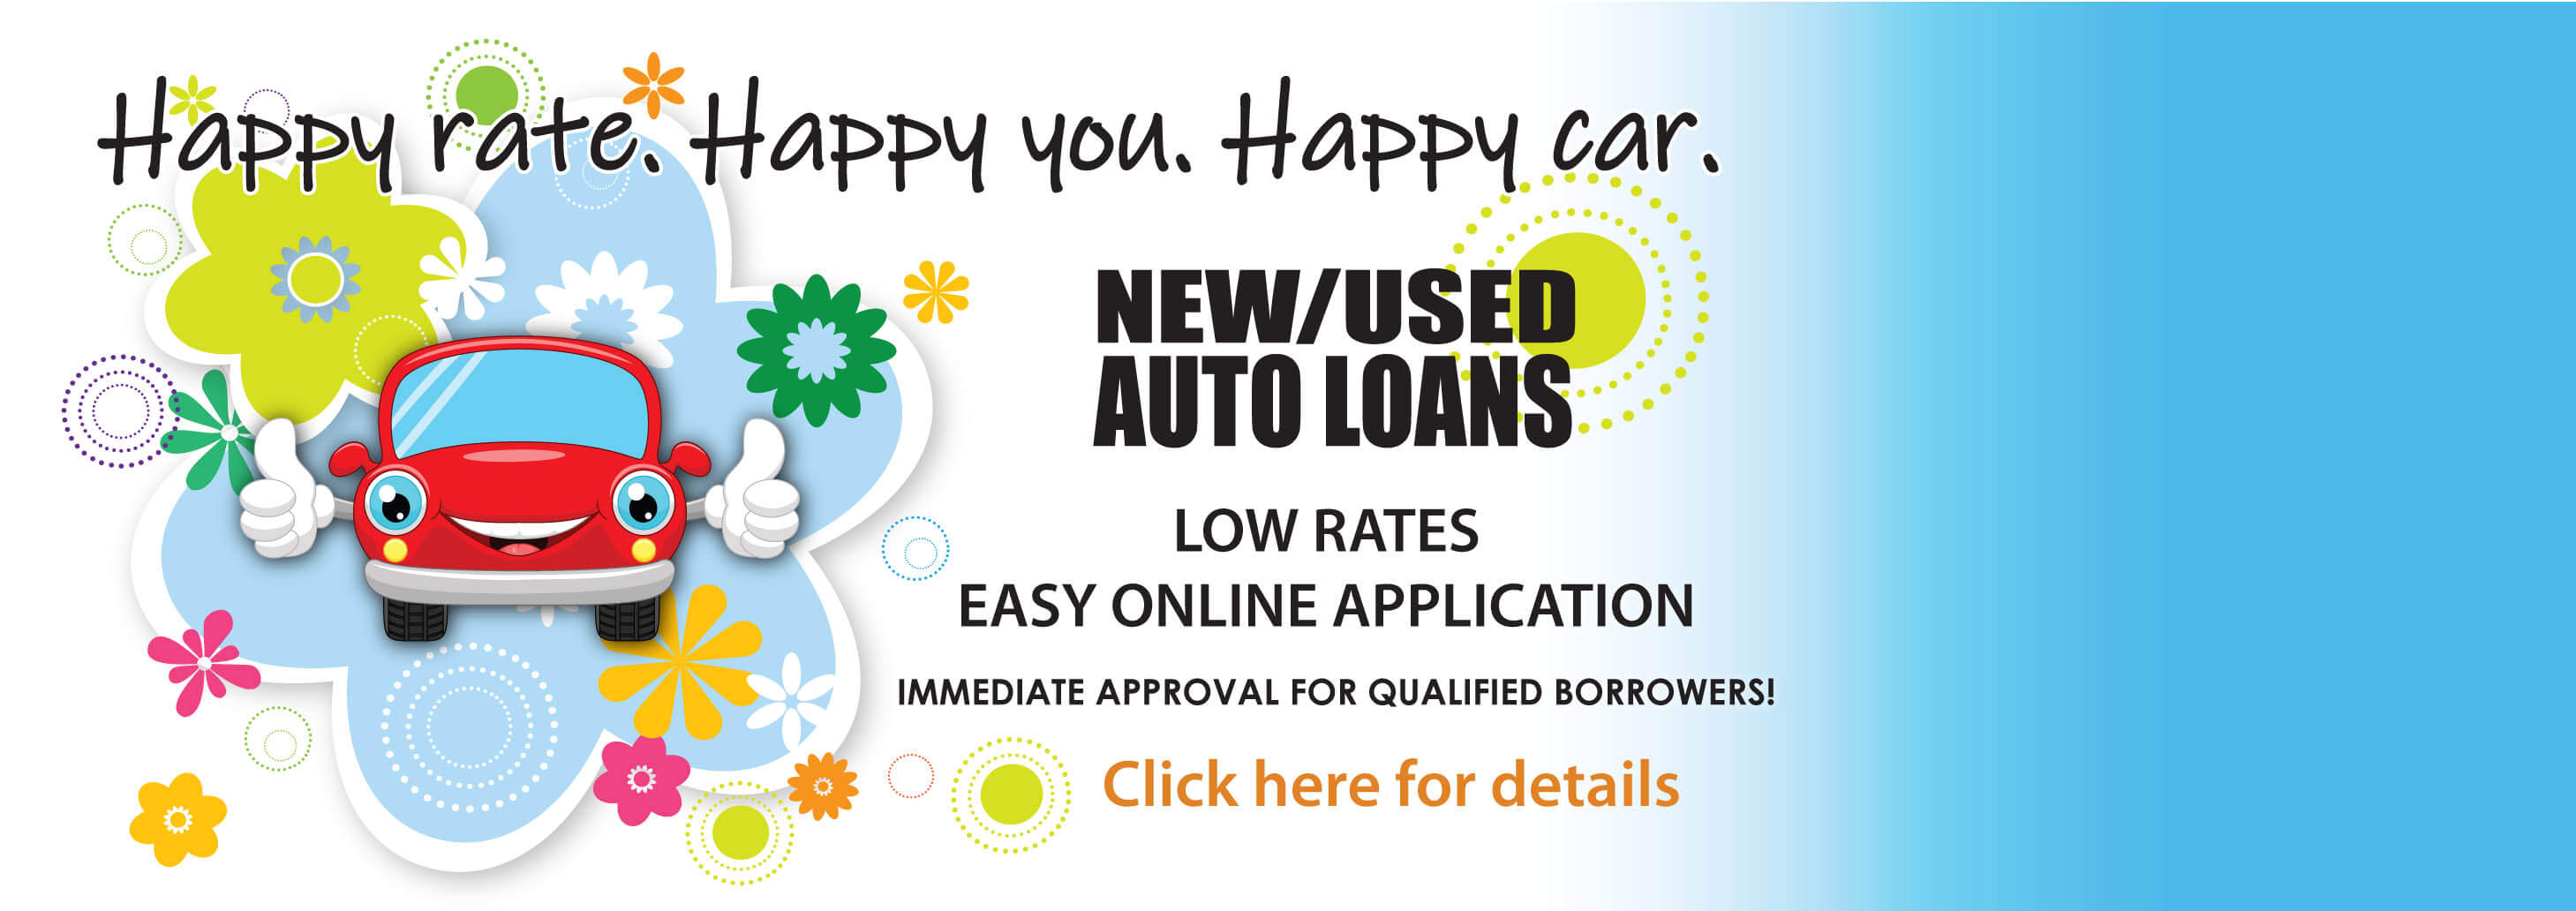 Happy rate. Happy you. Happy car. New/used auto loans. Low rates. Easily online application. Immediate approval for qualified borrowers! Click here for details.